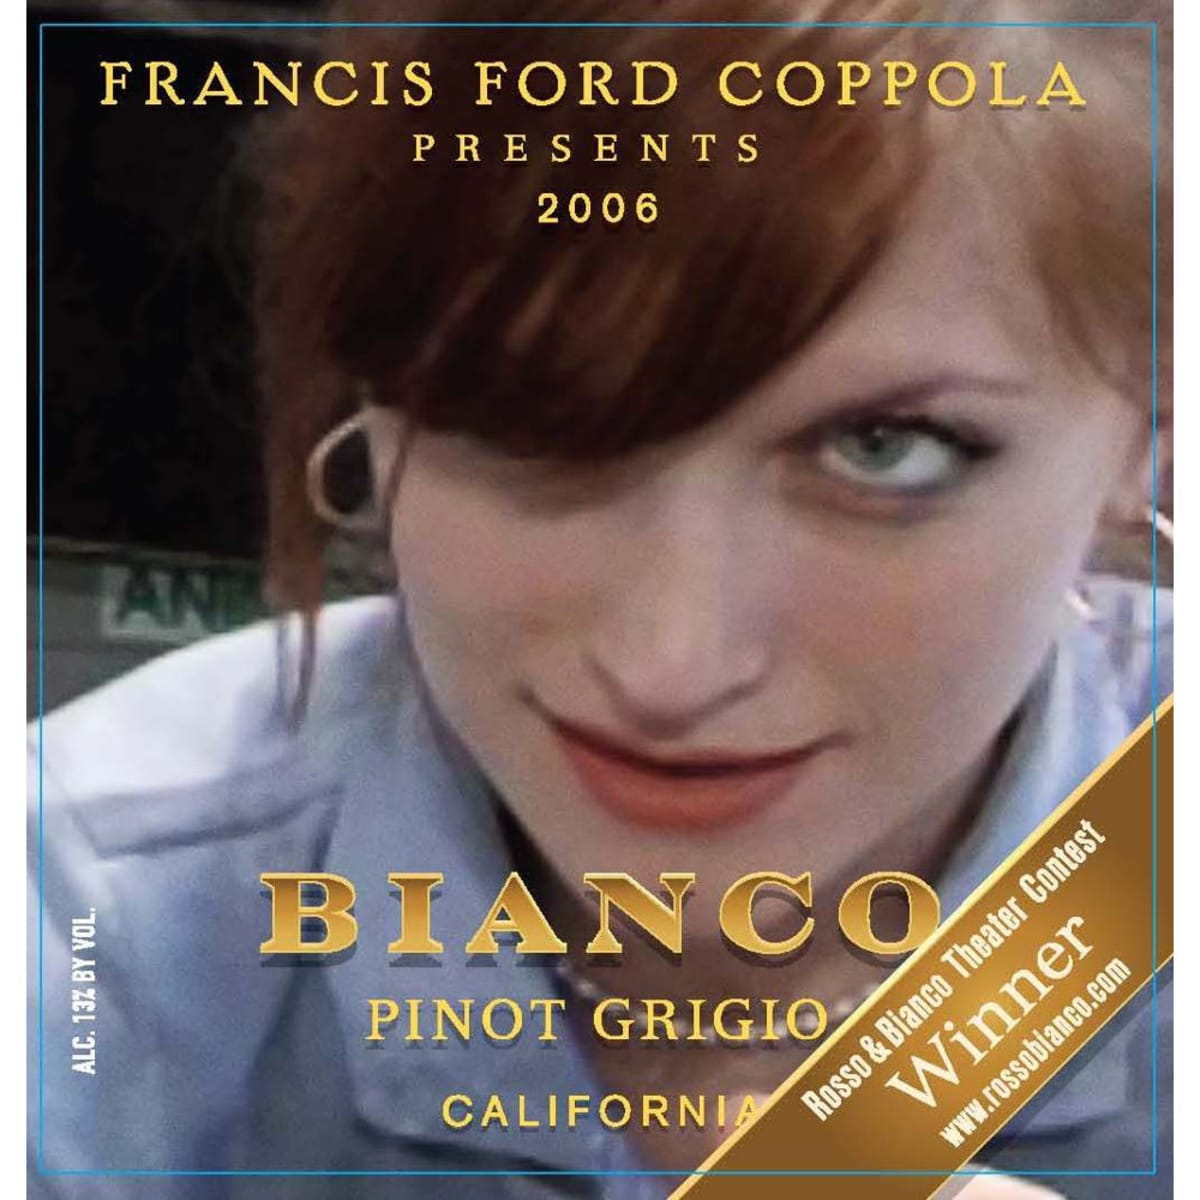 Francis Ford Coppola Bianco Pinot Grigio 2006 Front Label